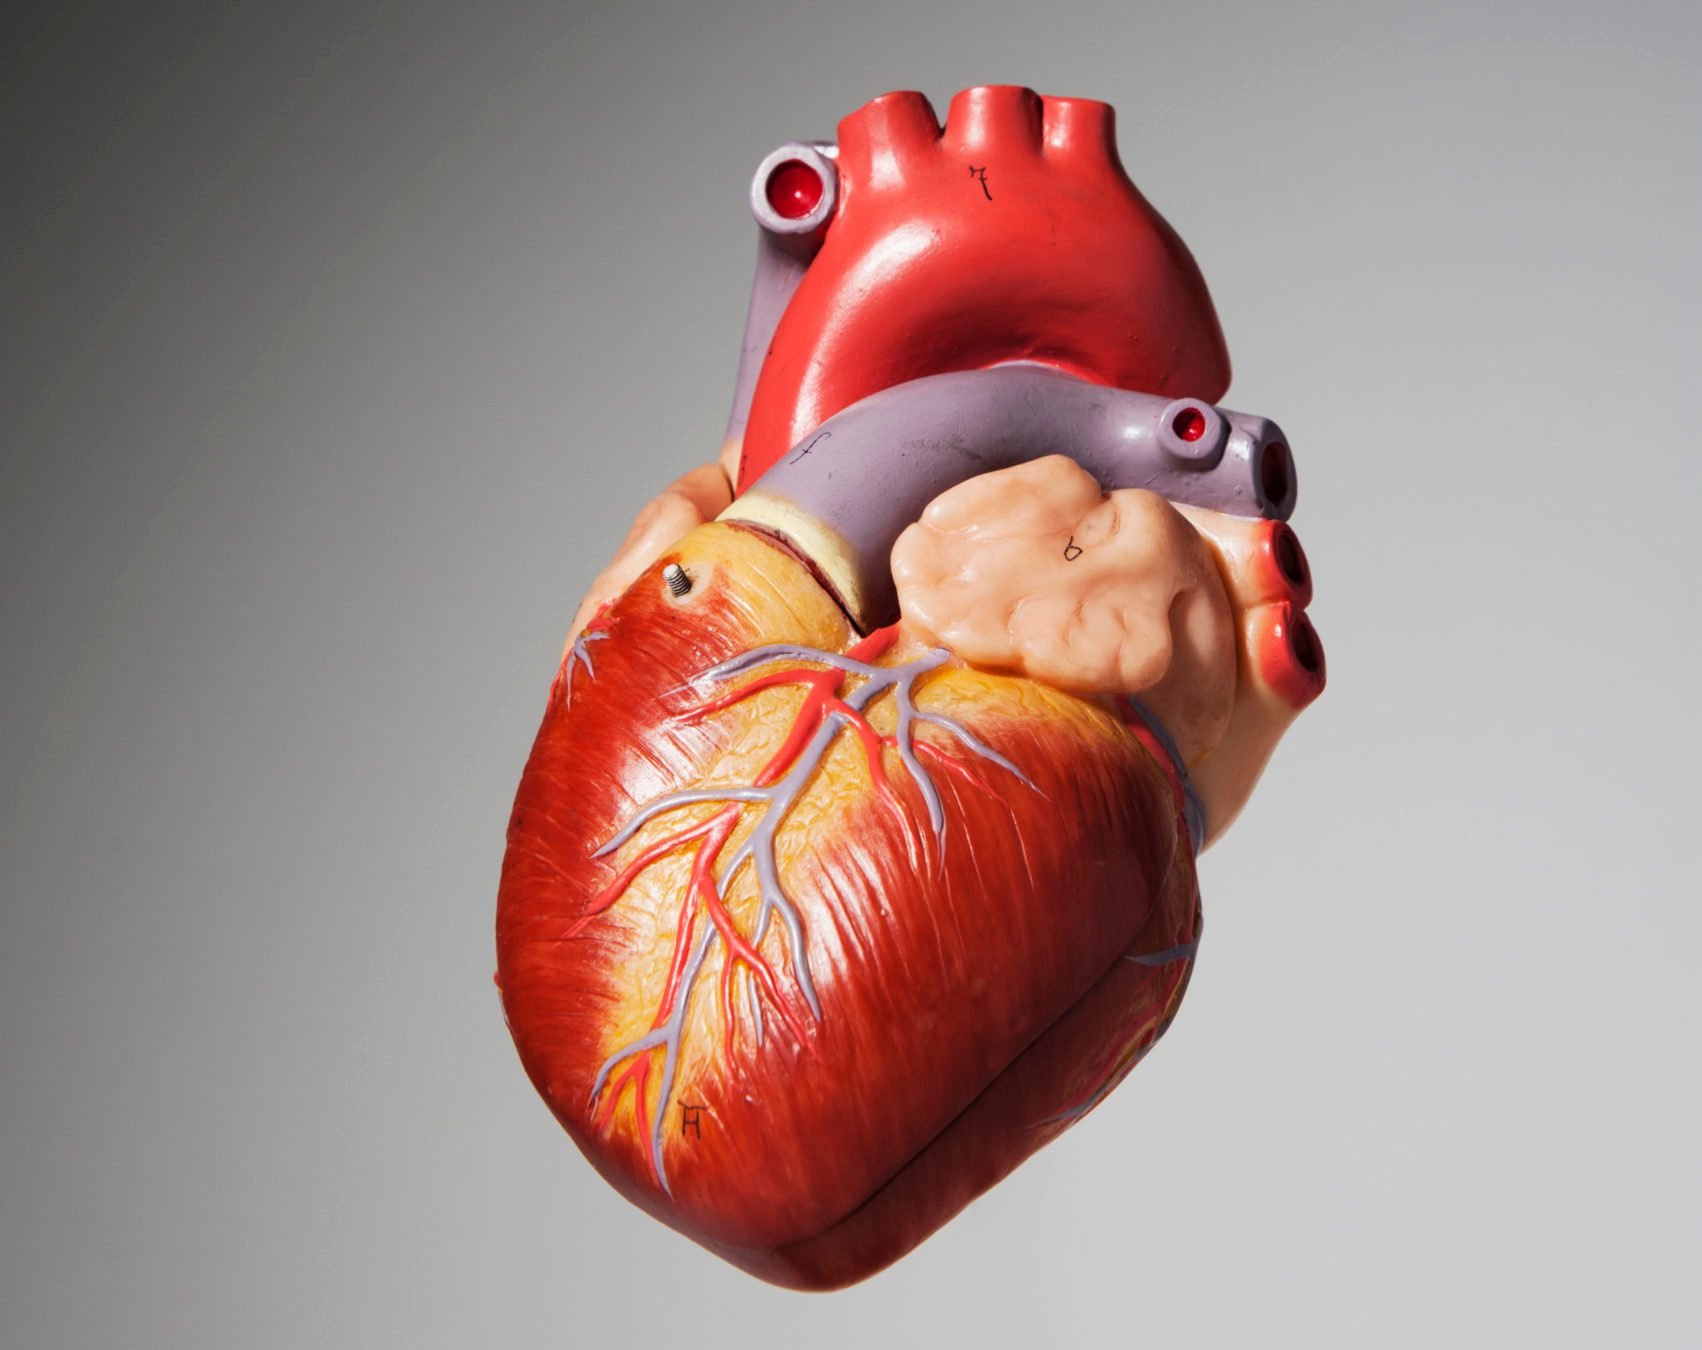 8 Ways to Keep Your Heart Valves Healthy